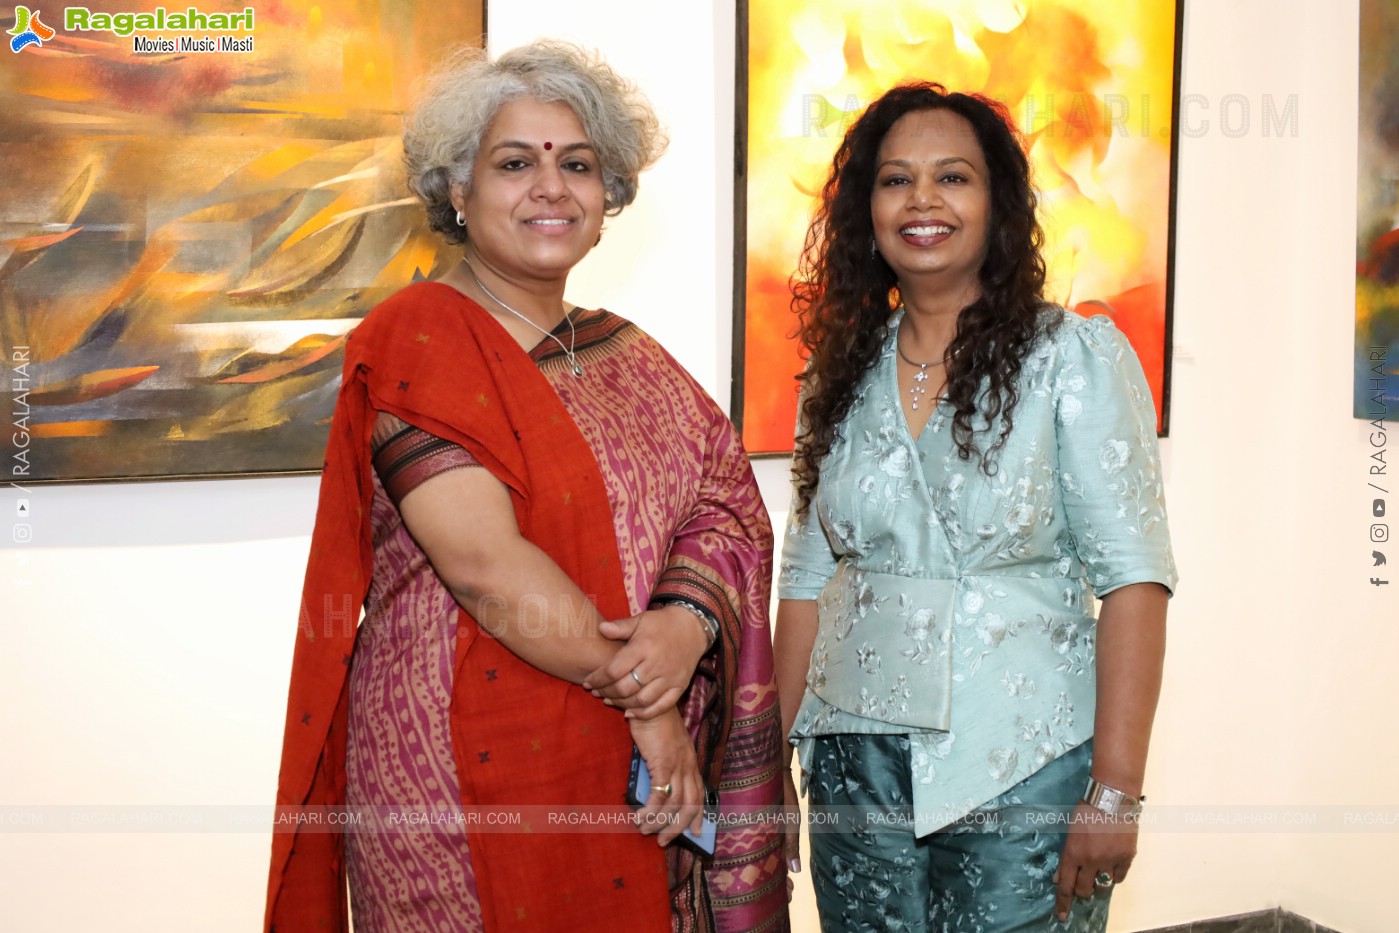 Aalankritha Art Gallery Paintings Exhibition Titled 'Field of Dreams'